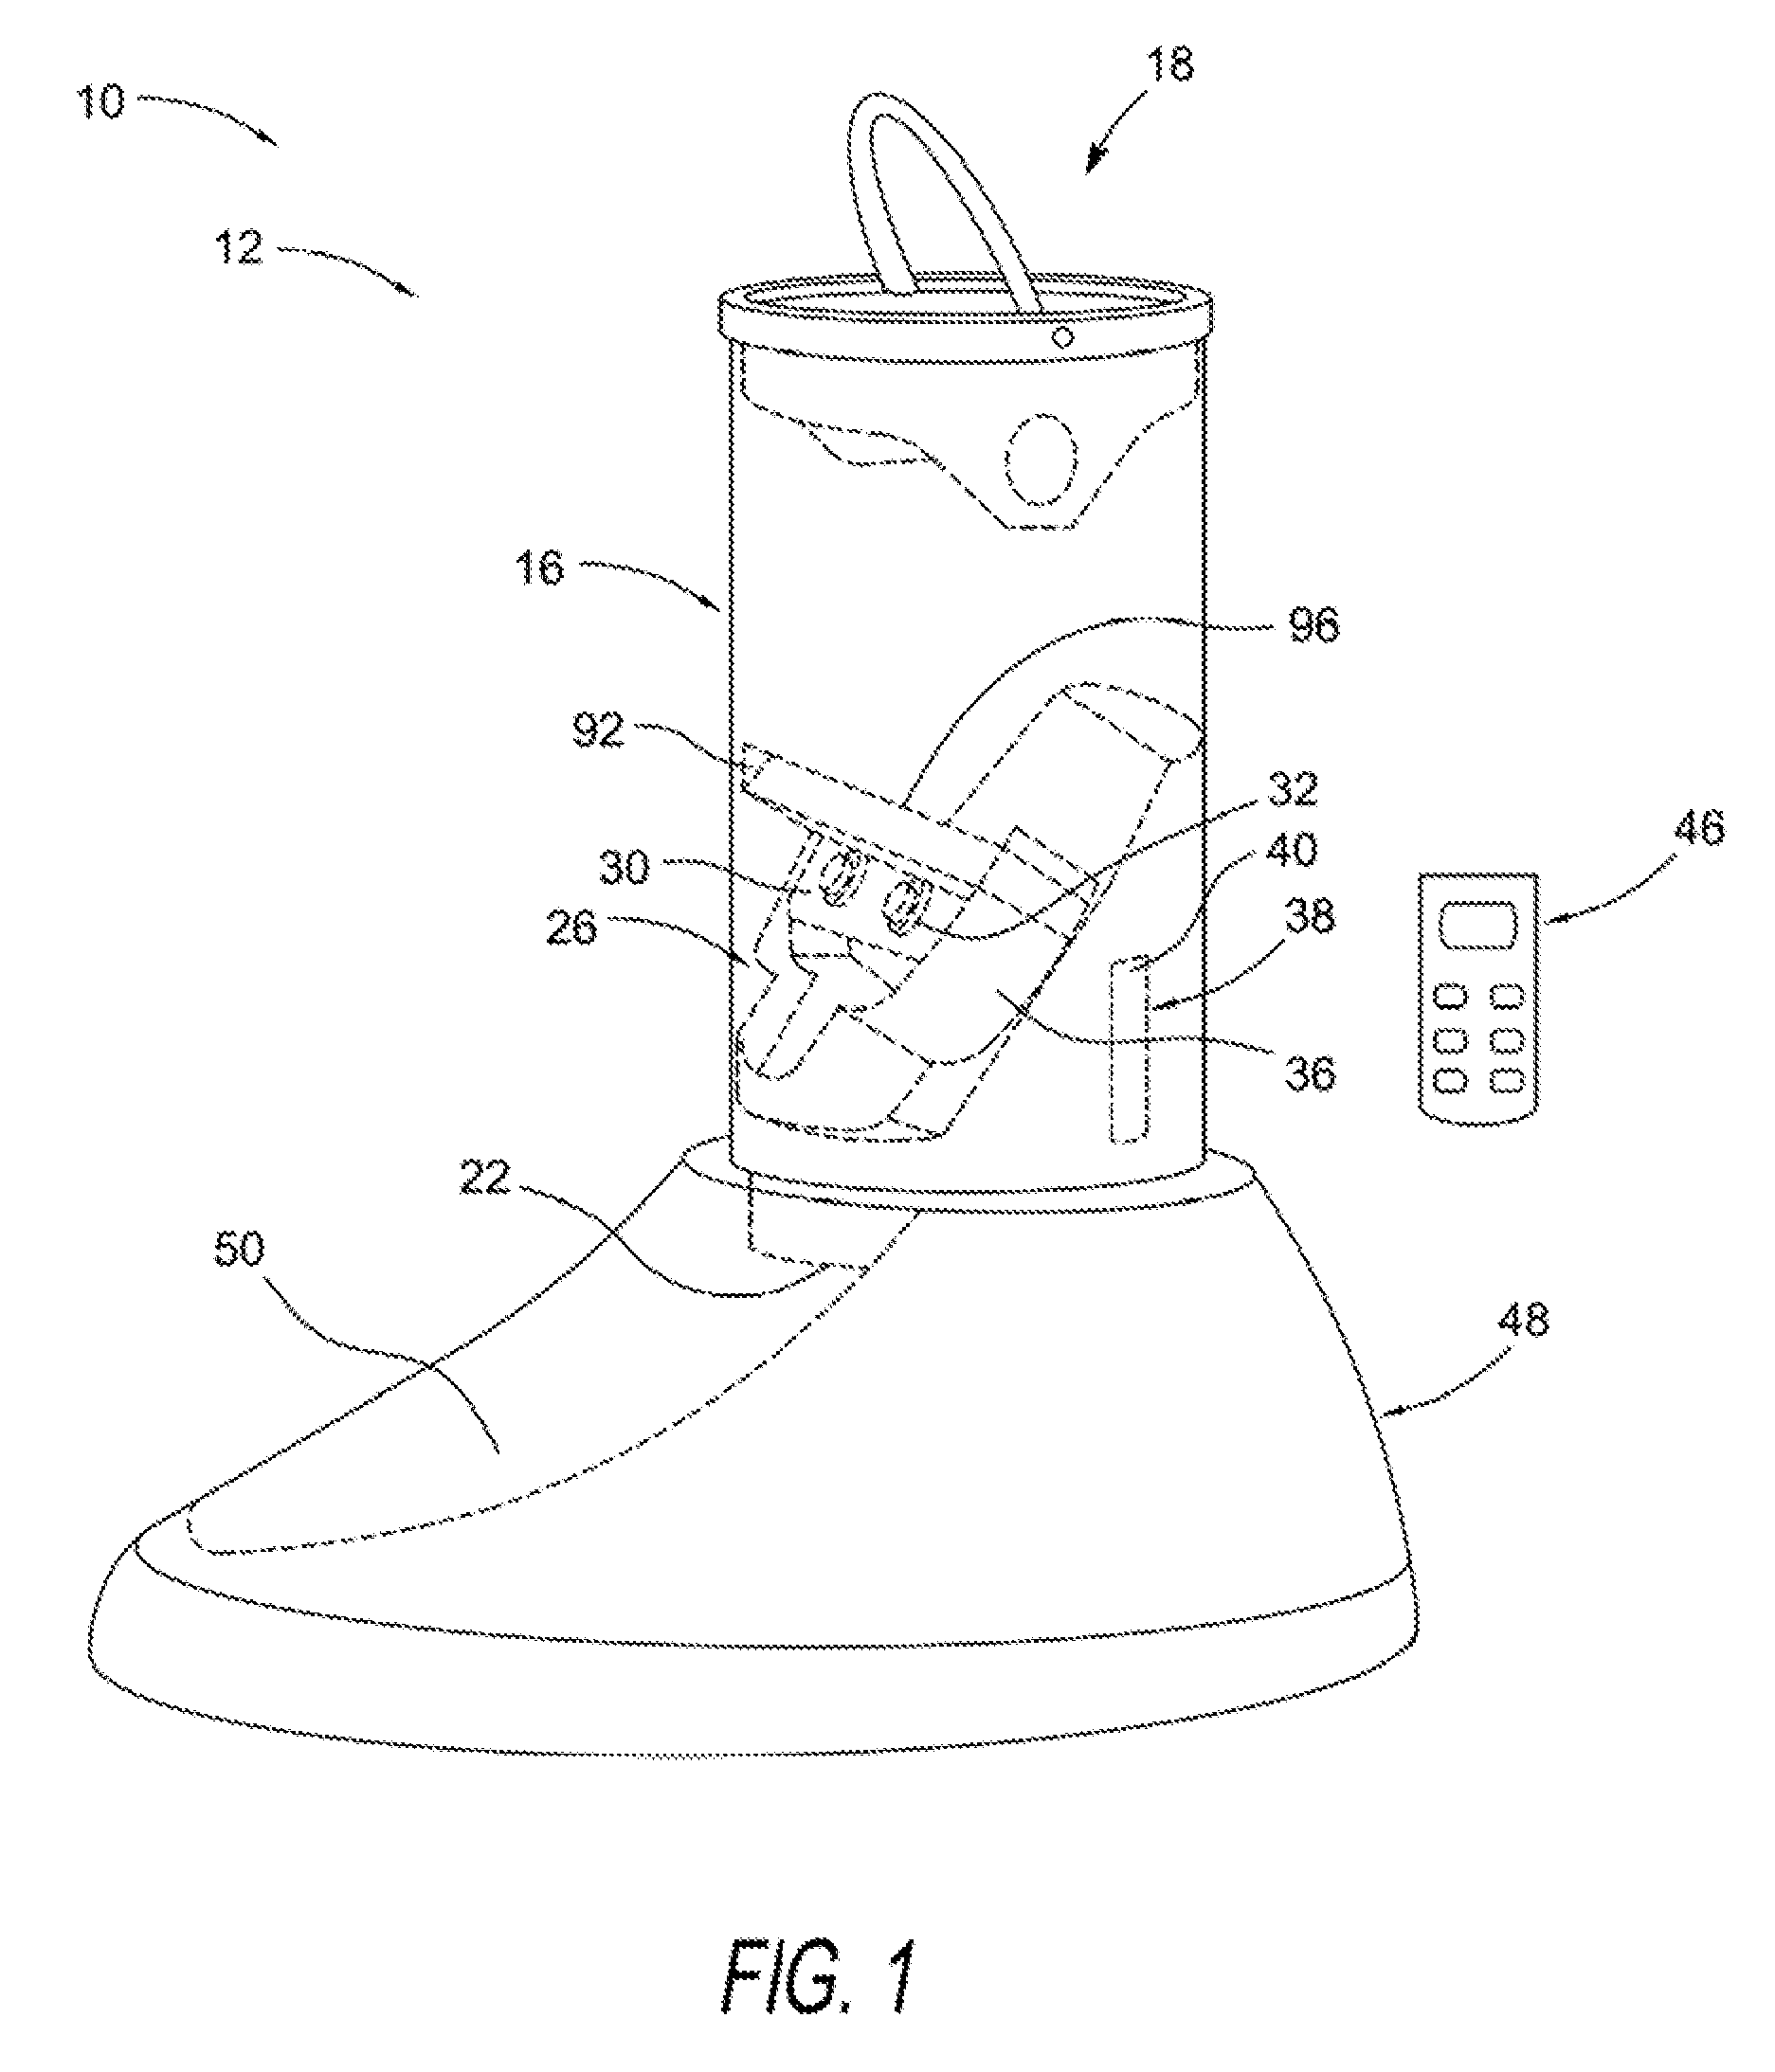 Animal training device and methods therefor